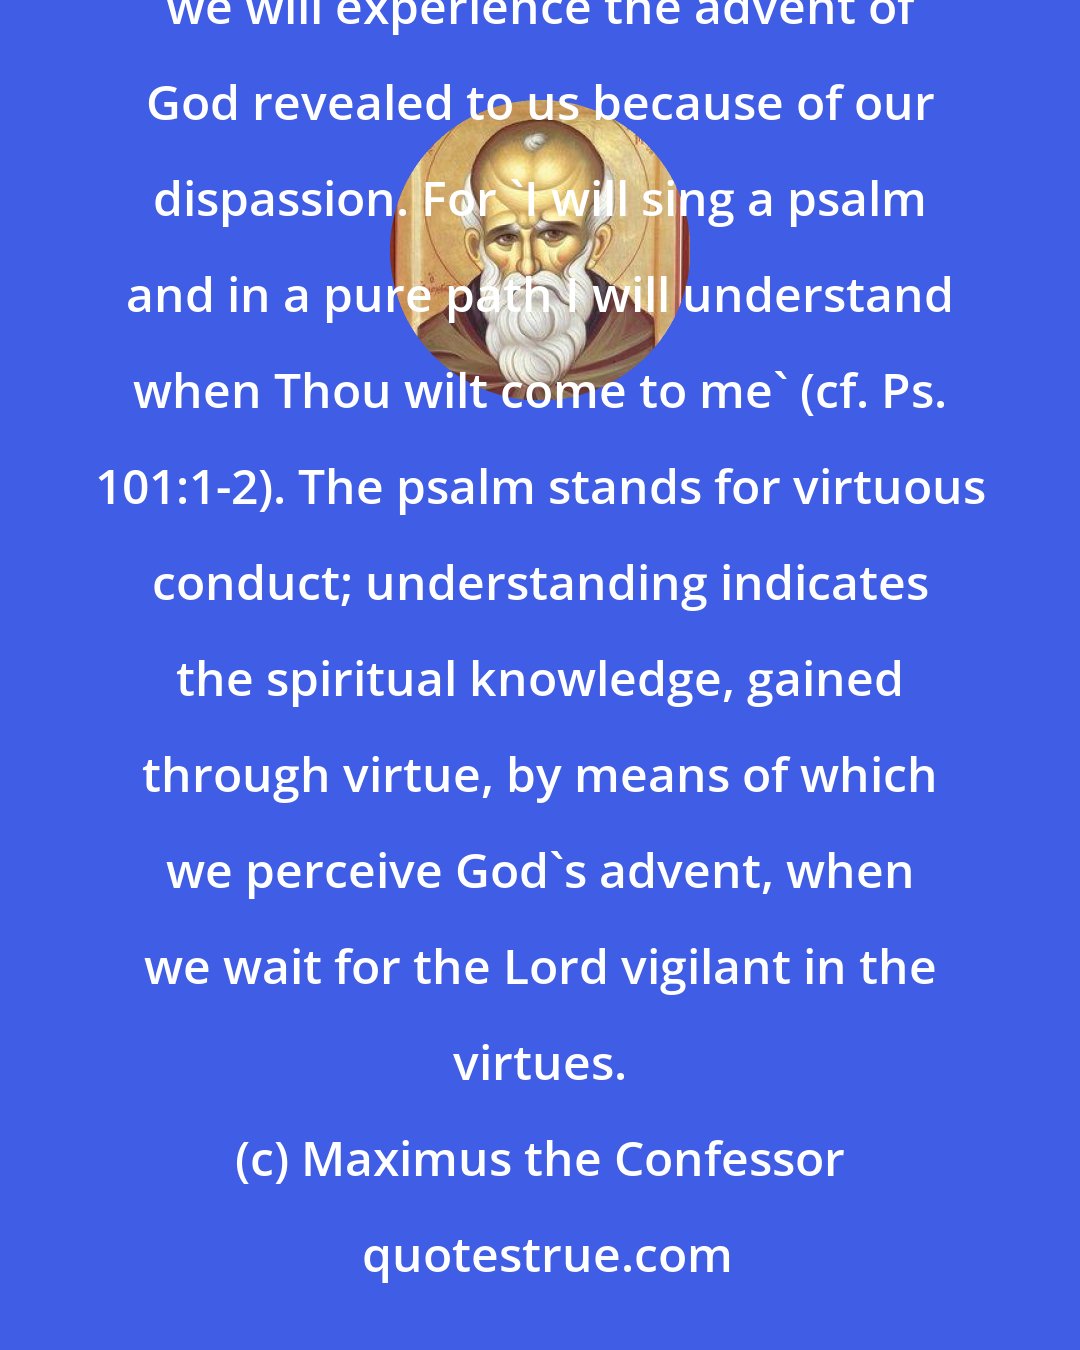 Maximus the Confessor: If we keep the path of virtue undefiled through devout and true knowledge, and do not deviate to either side, we will experience the advent of God revealed to us because of our dispassion. For 'I will sing a psalm and in a pure path I will understand when Thou wilt come to me' (cf. Ps. 101:1-2). The psalm stands for virtuous conduct; understanding indicates the spiritual knowledge, gained through virtue, by means of which we perceive God's advent, when we wait for the Lord vigilant in the virtues.